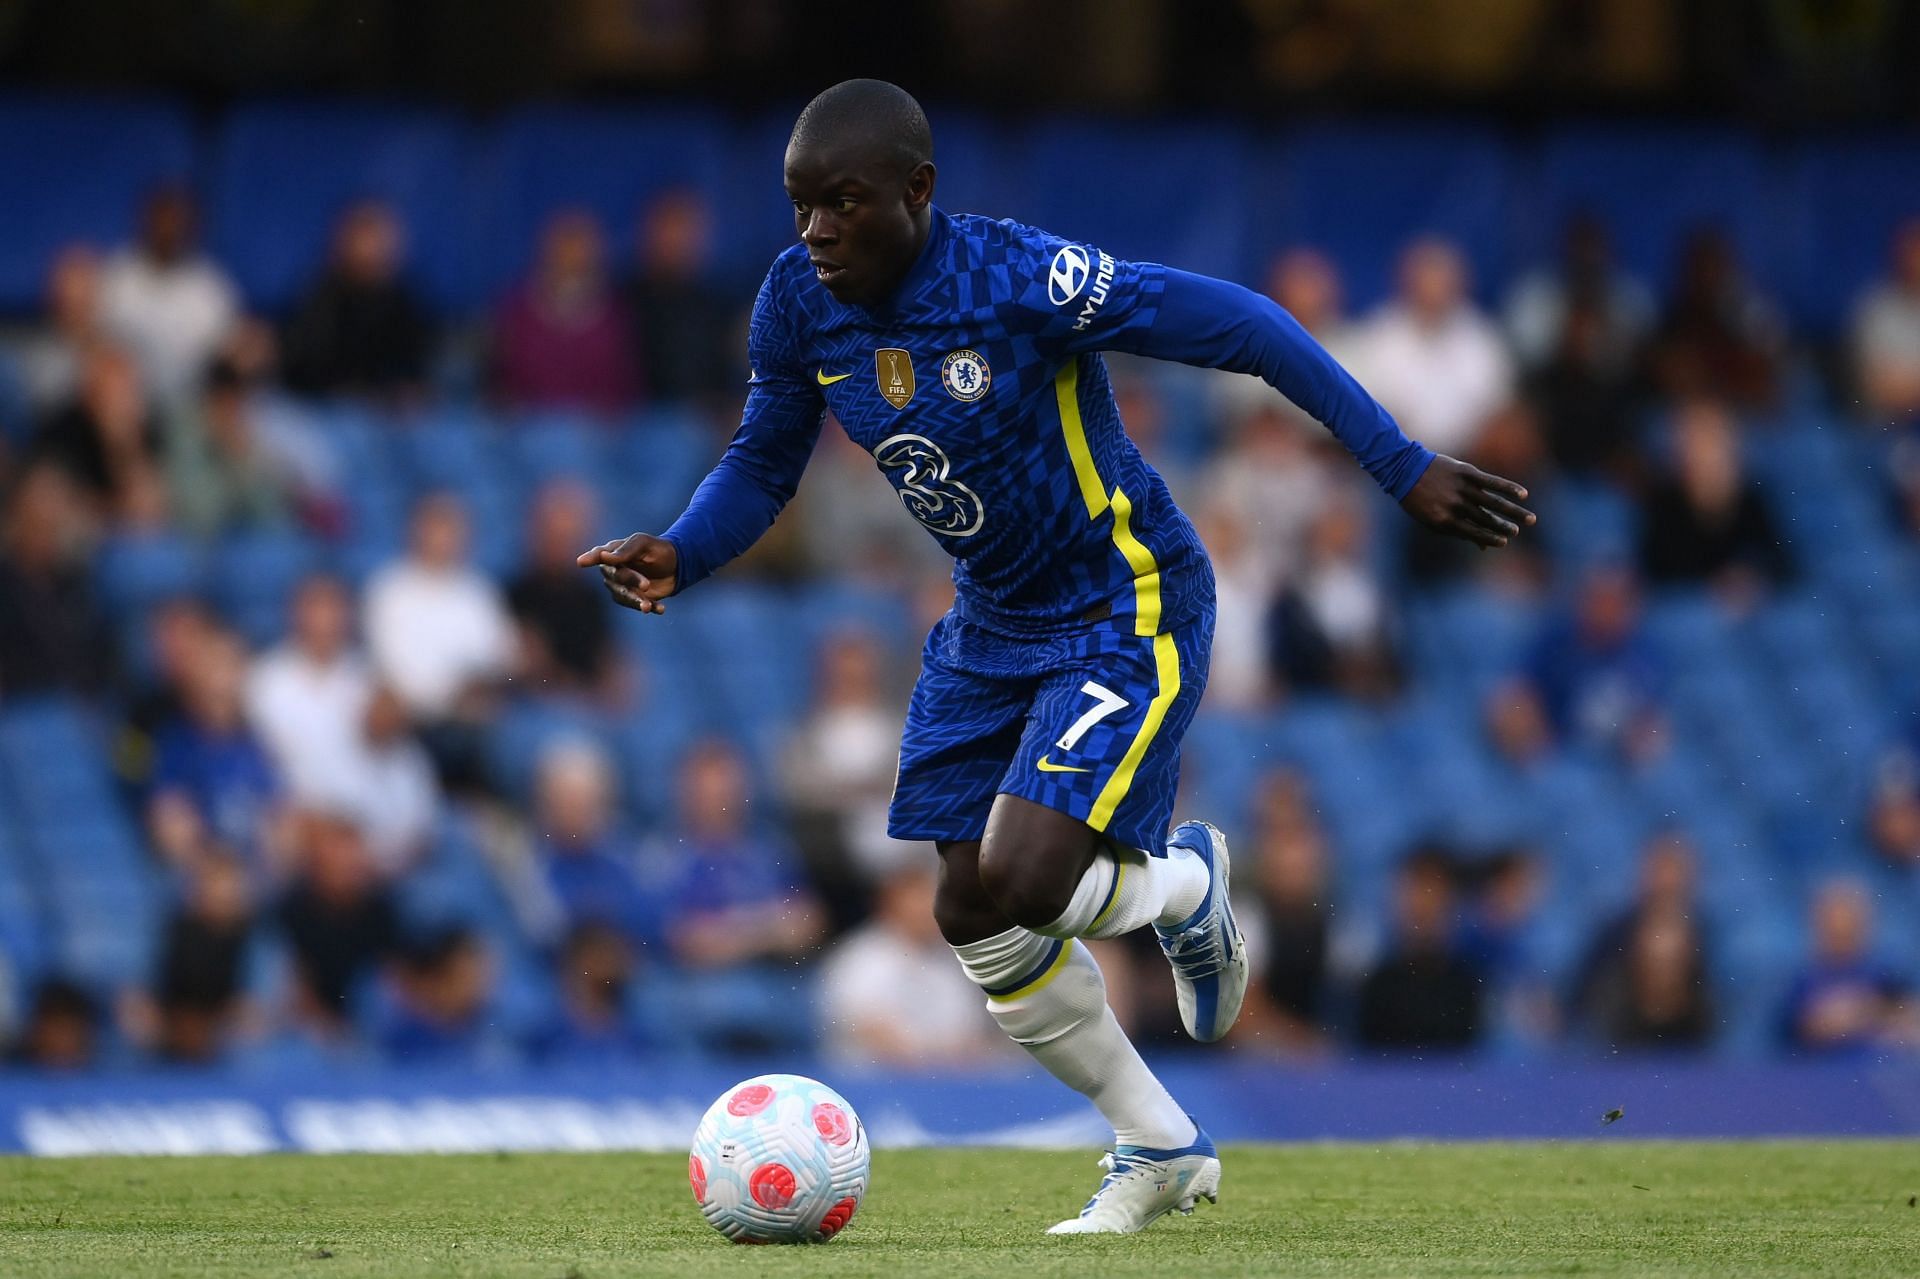 Kante may be off at the end of the season